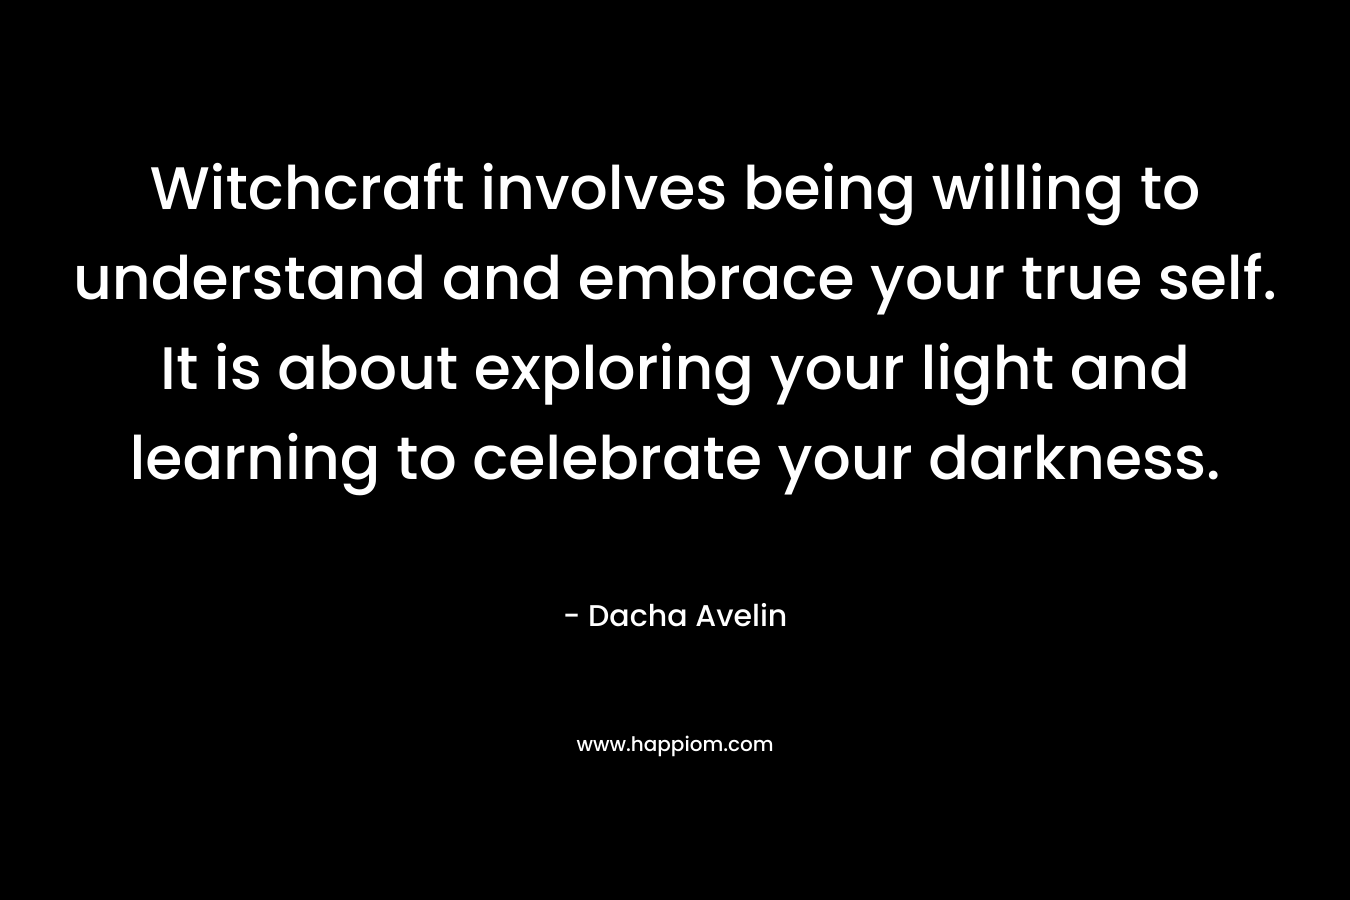 Witchcraft involves being willing to understand and embrace your true self. It is about exploring your light and learning to celebrate your darkness.